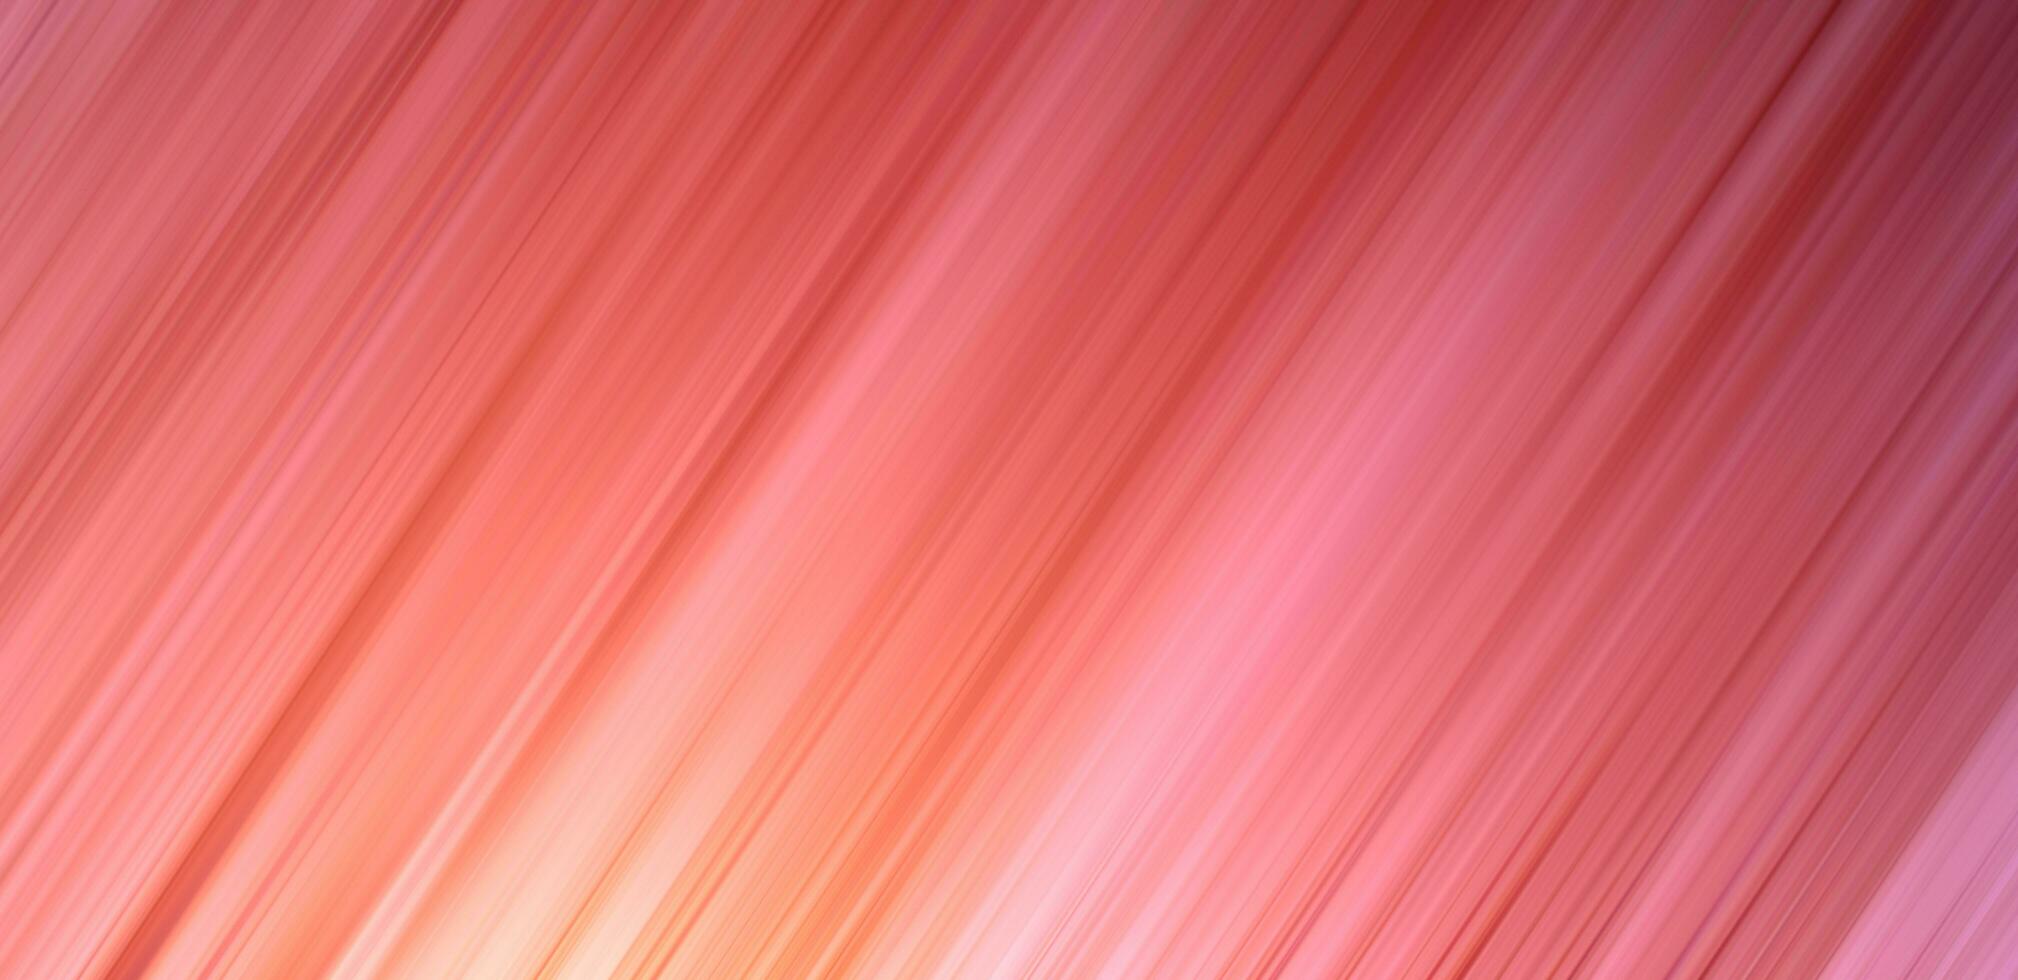 a pink and orange background with a blurred image photo